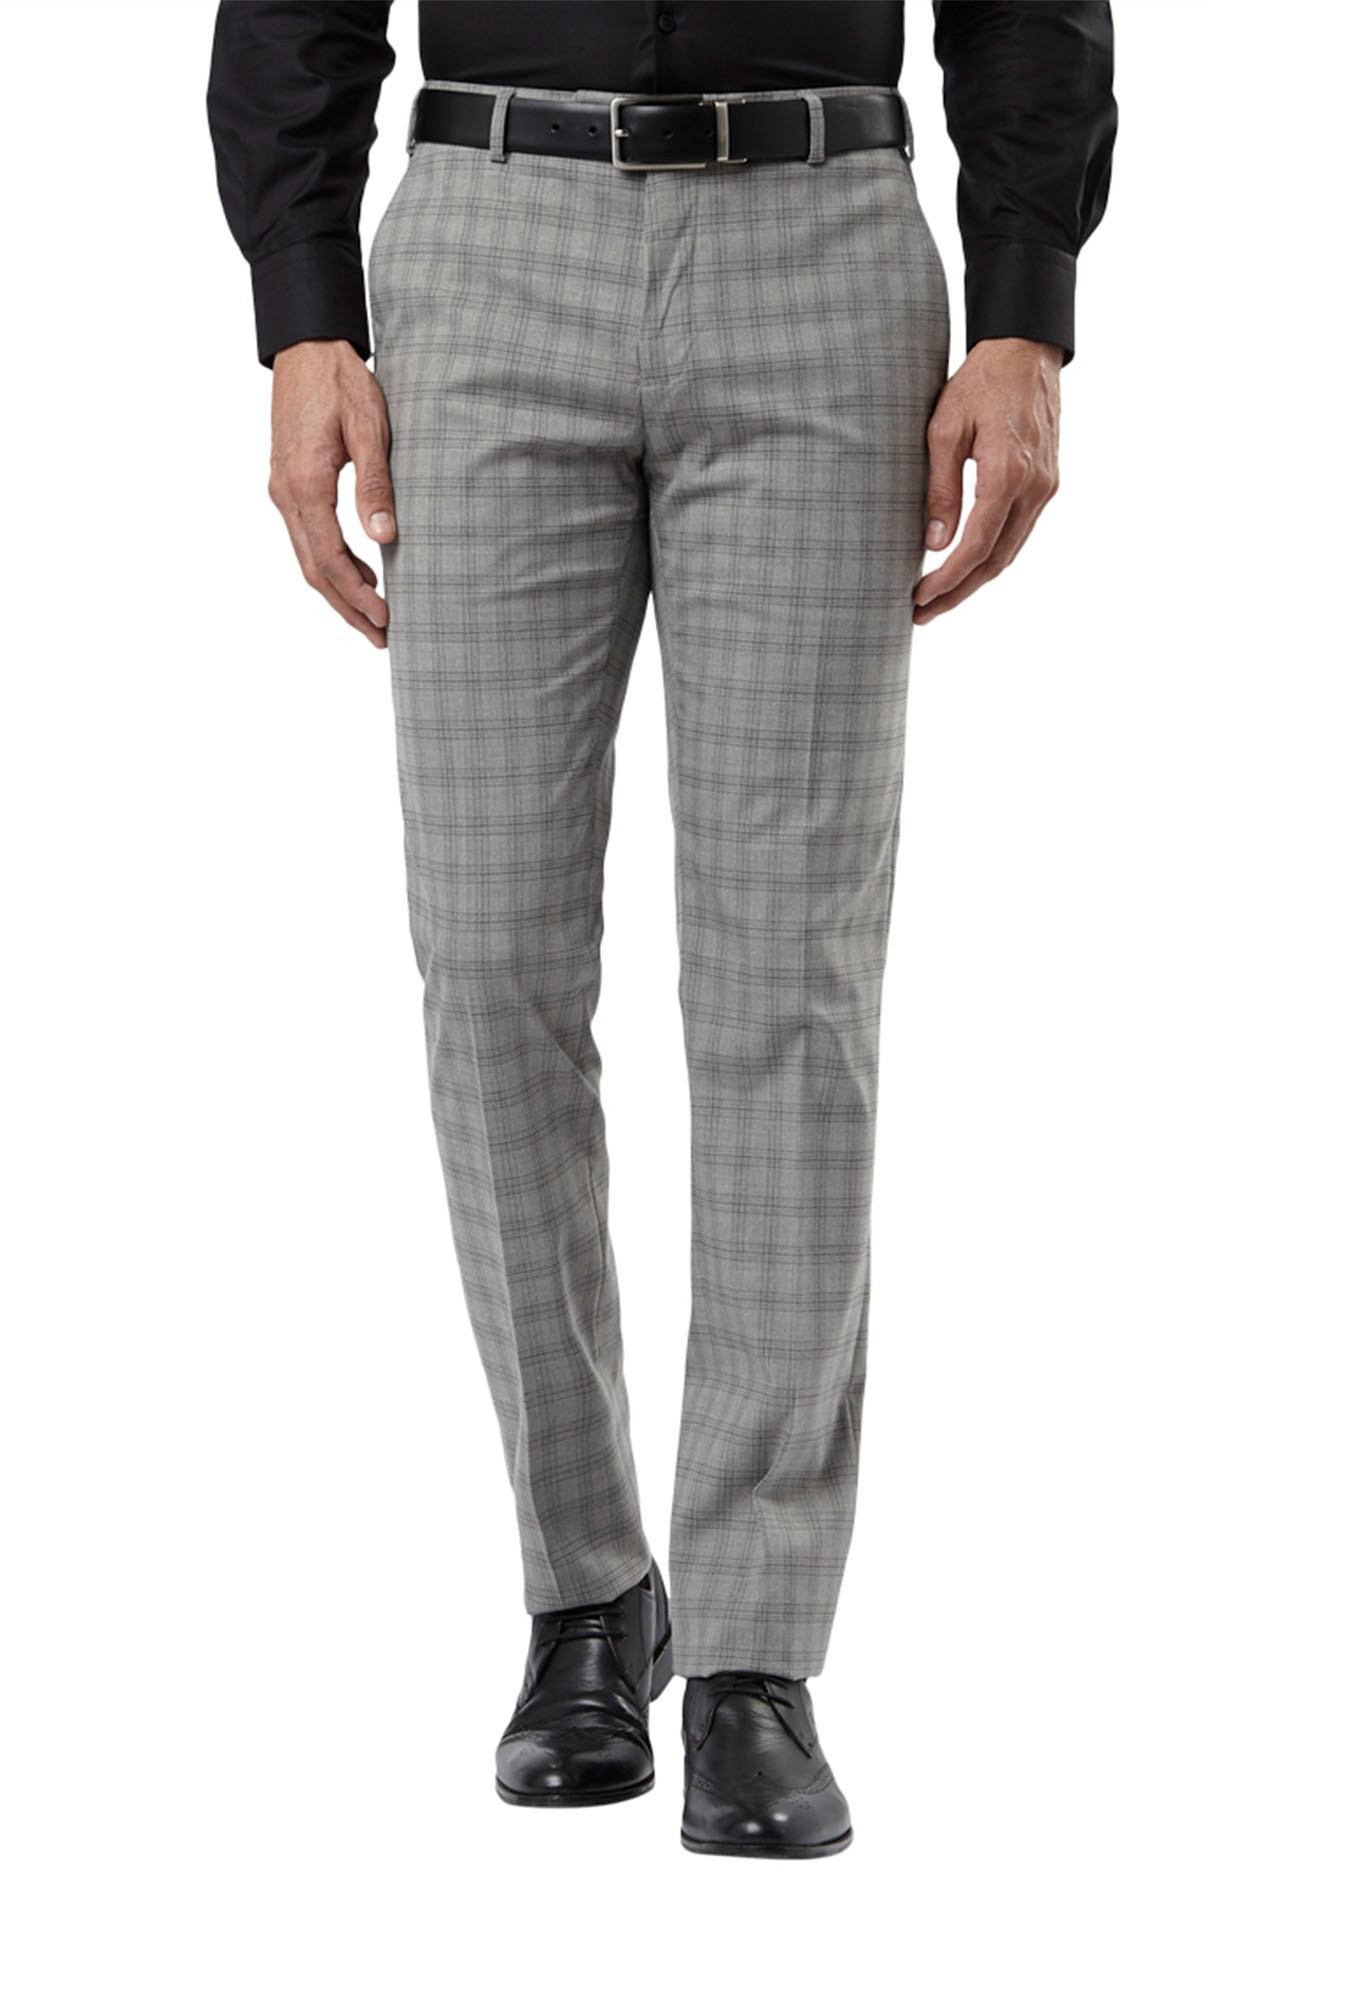 Buy Grey Mid Rise Check Suit Trousers Online at SELECTED HOMME 237335301